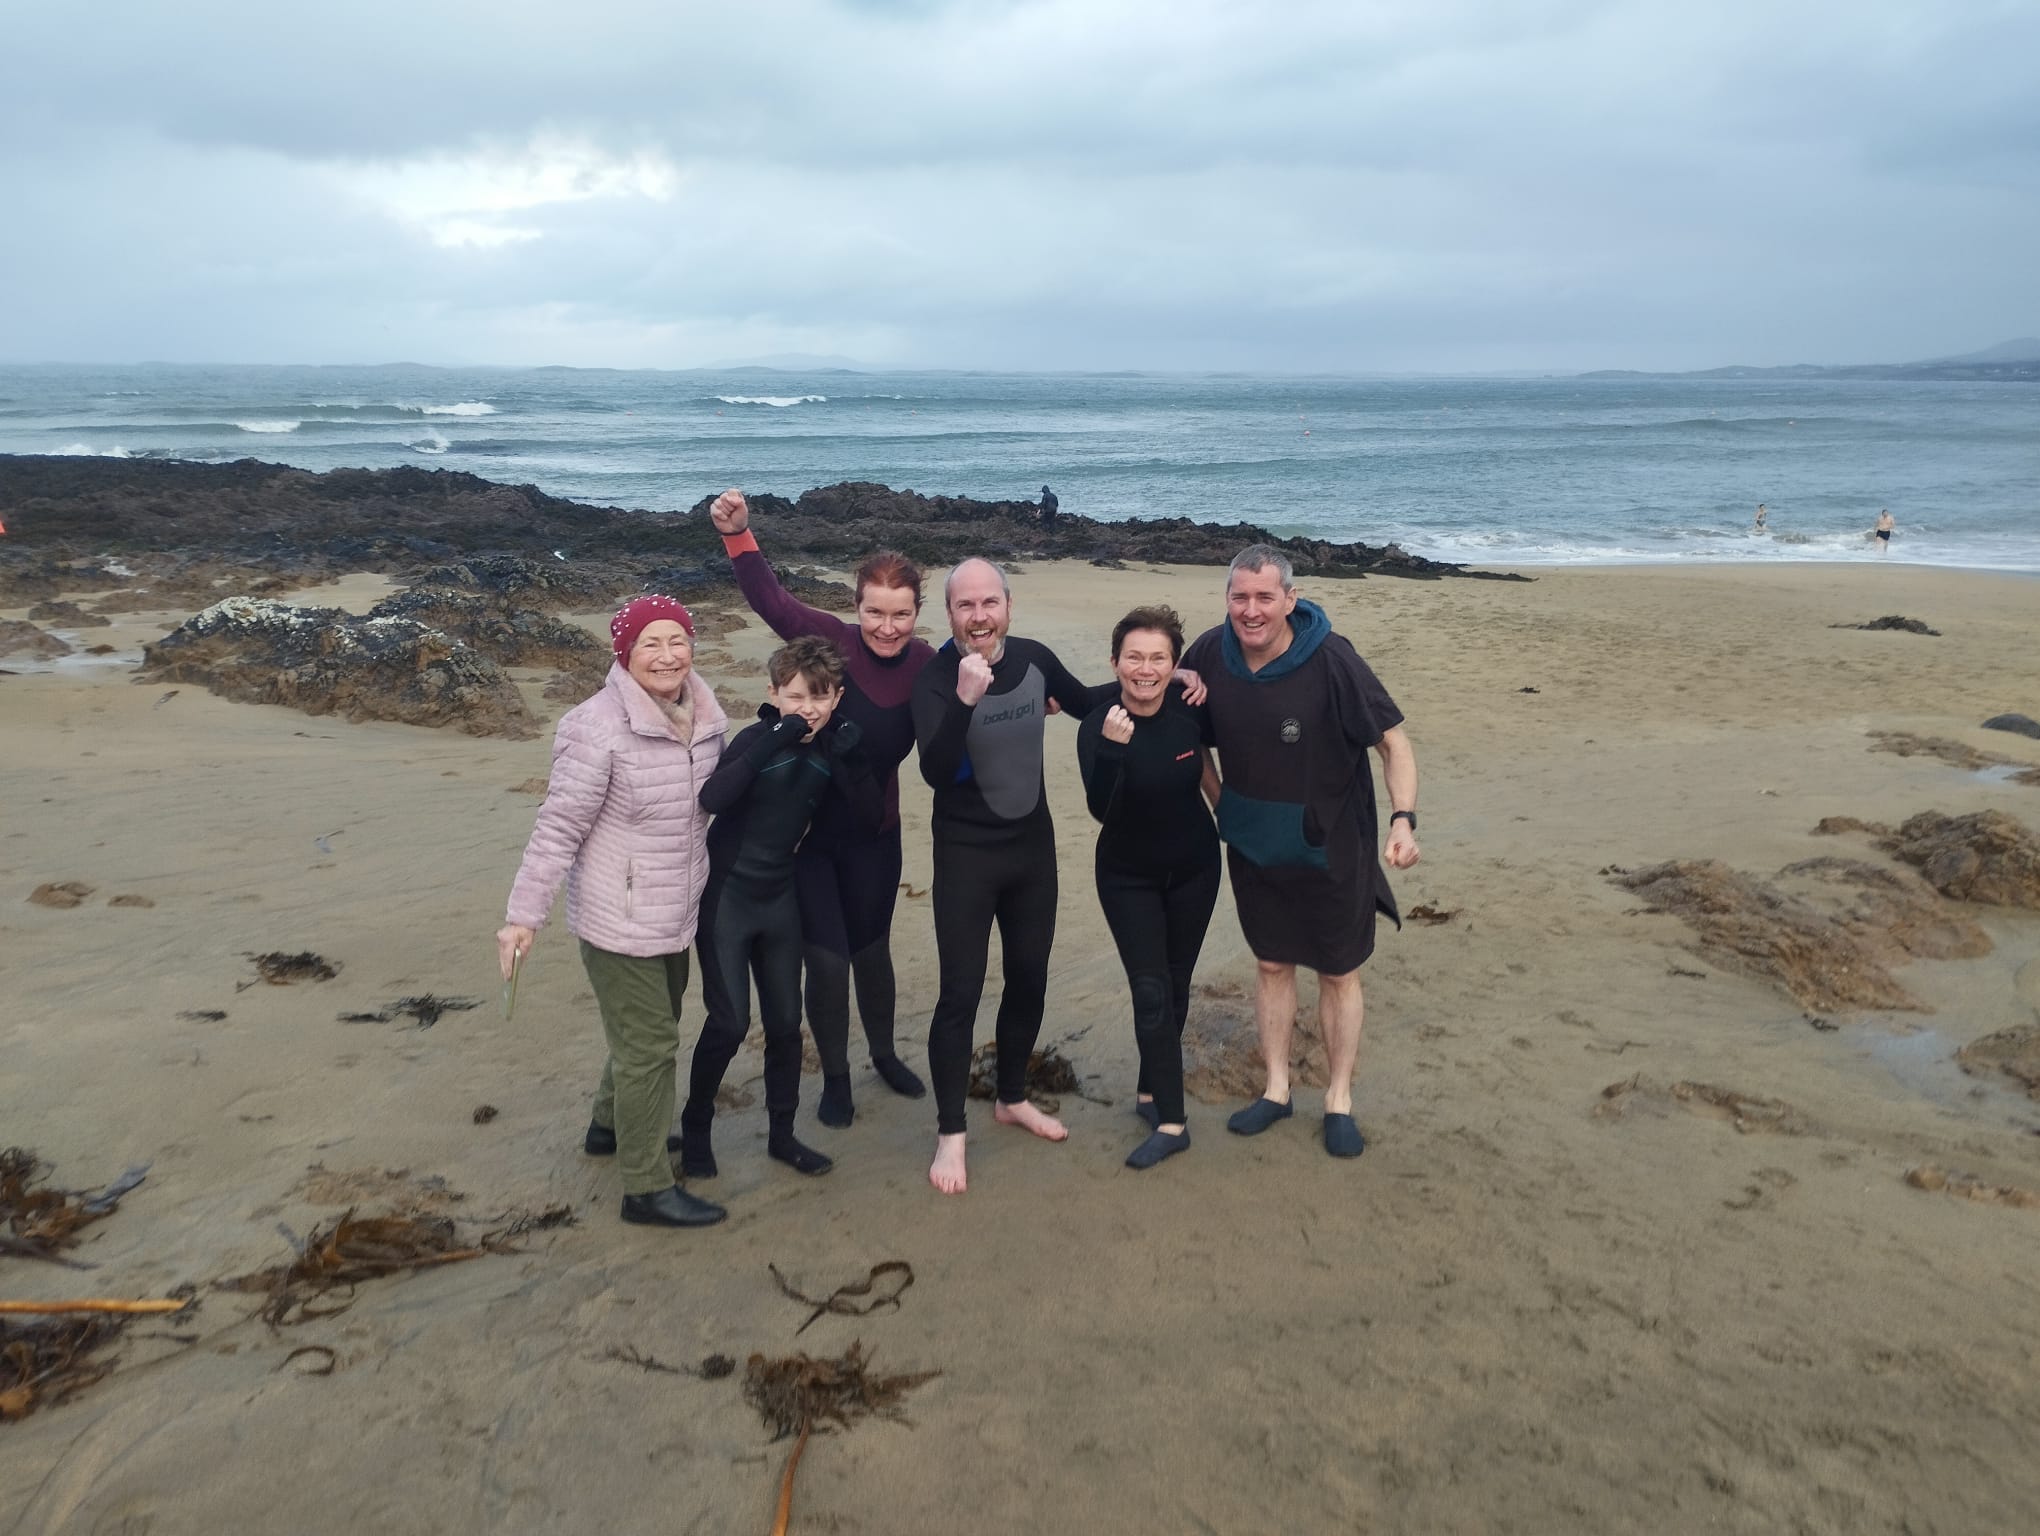 Oliver Moran taking part in a new year's swim with family in County Mayo.